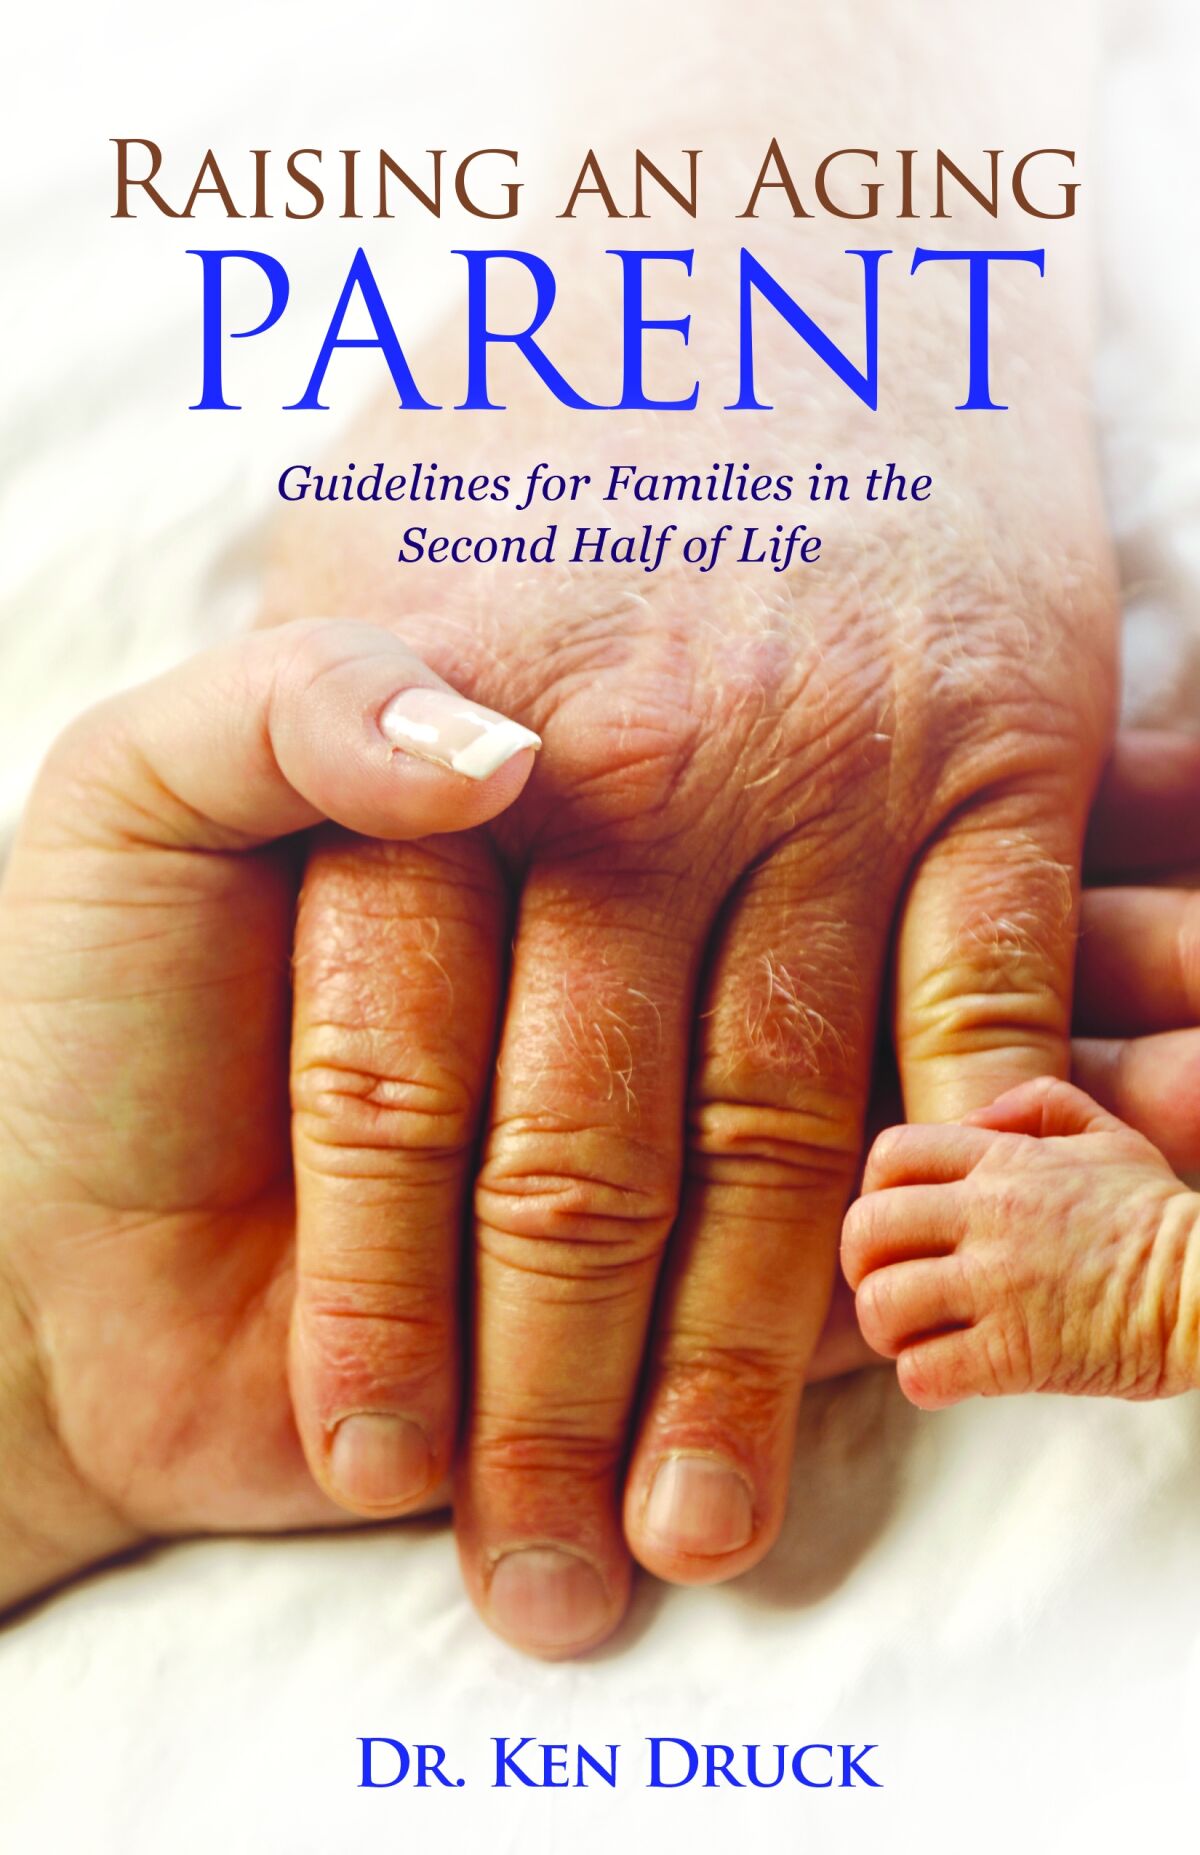 The cover of “Raising an Aging Parent”